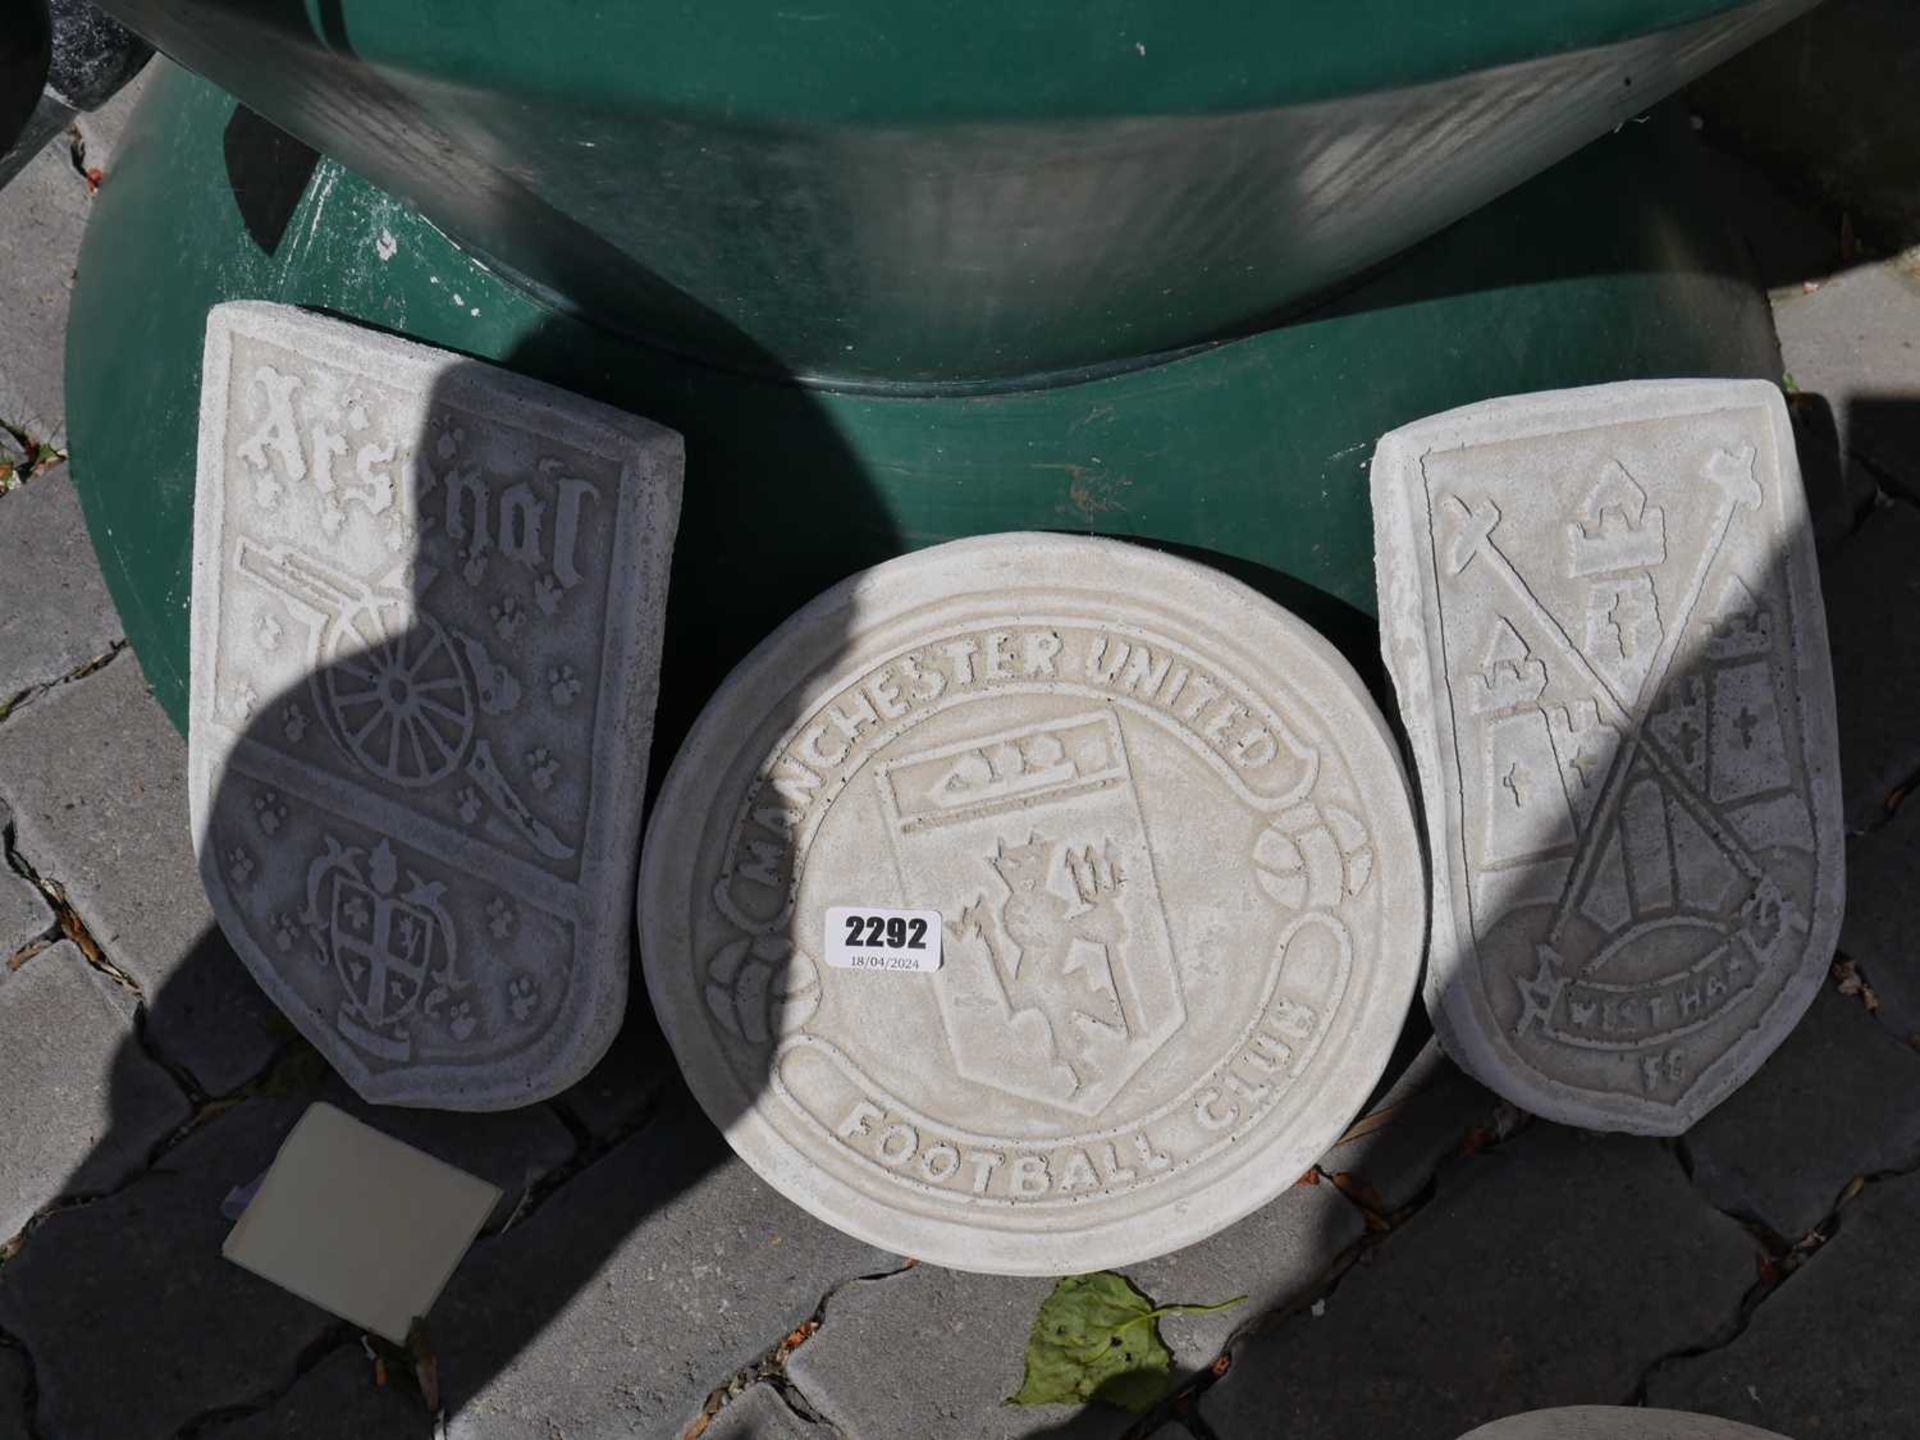 3 concrete footballl plaques; Arsenal, Manchester United and West Ham